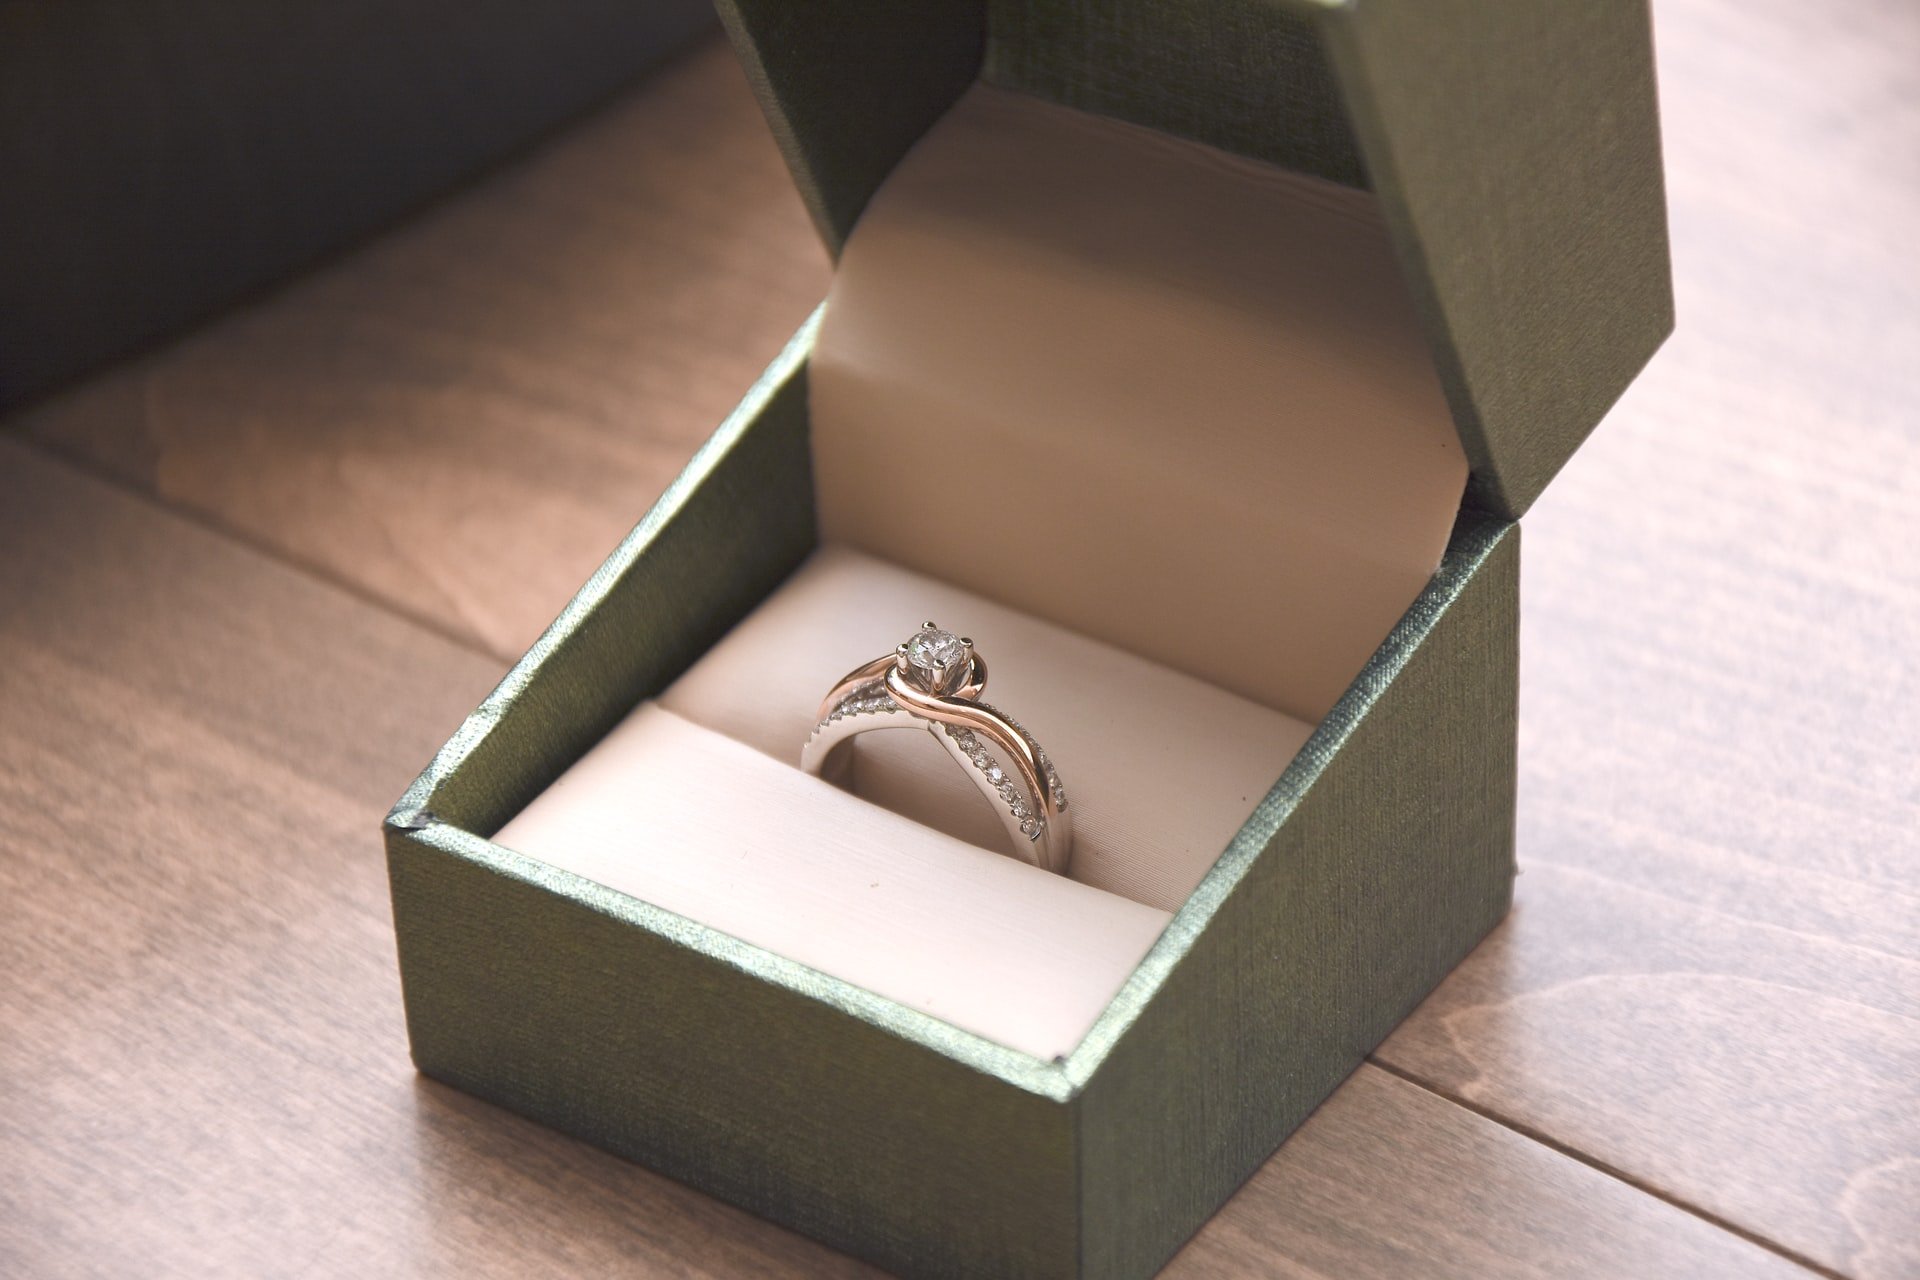 He kept the ring under his drawer. | Source: Unsplash